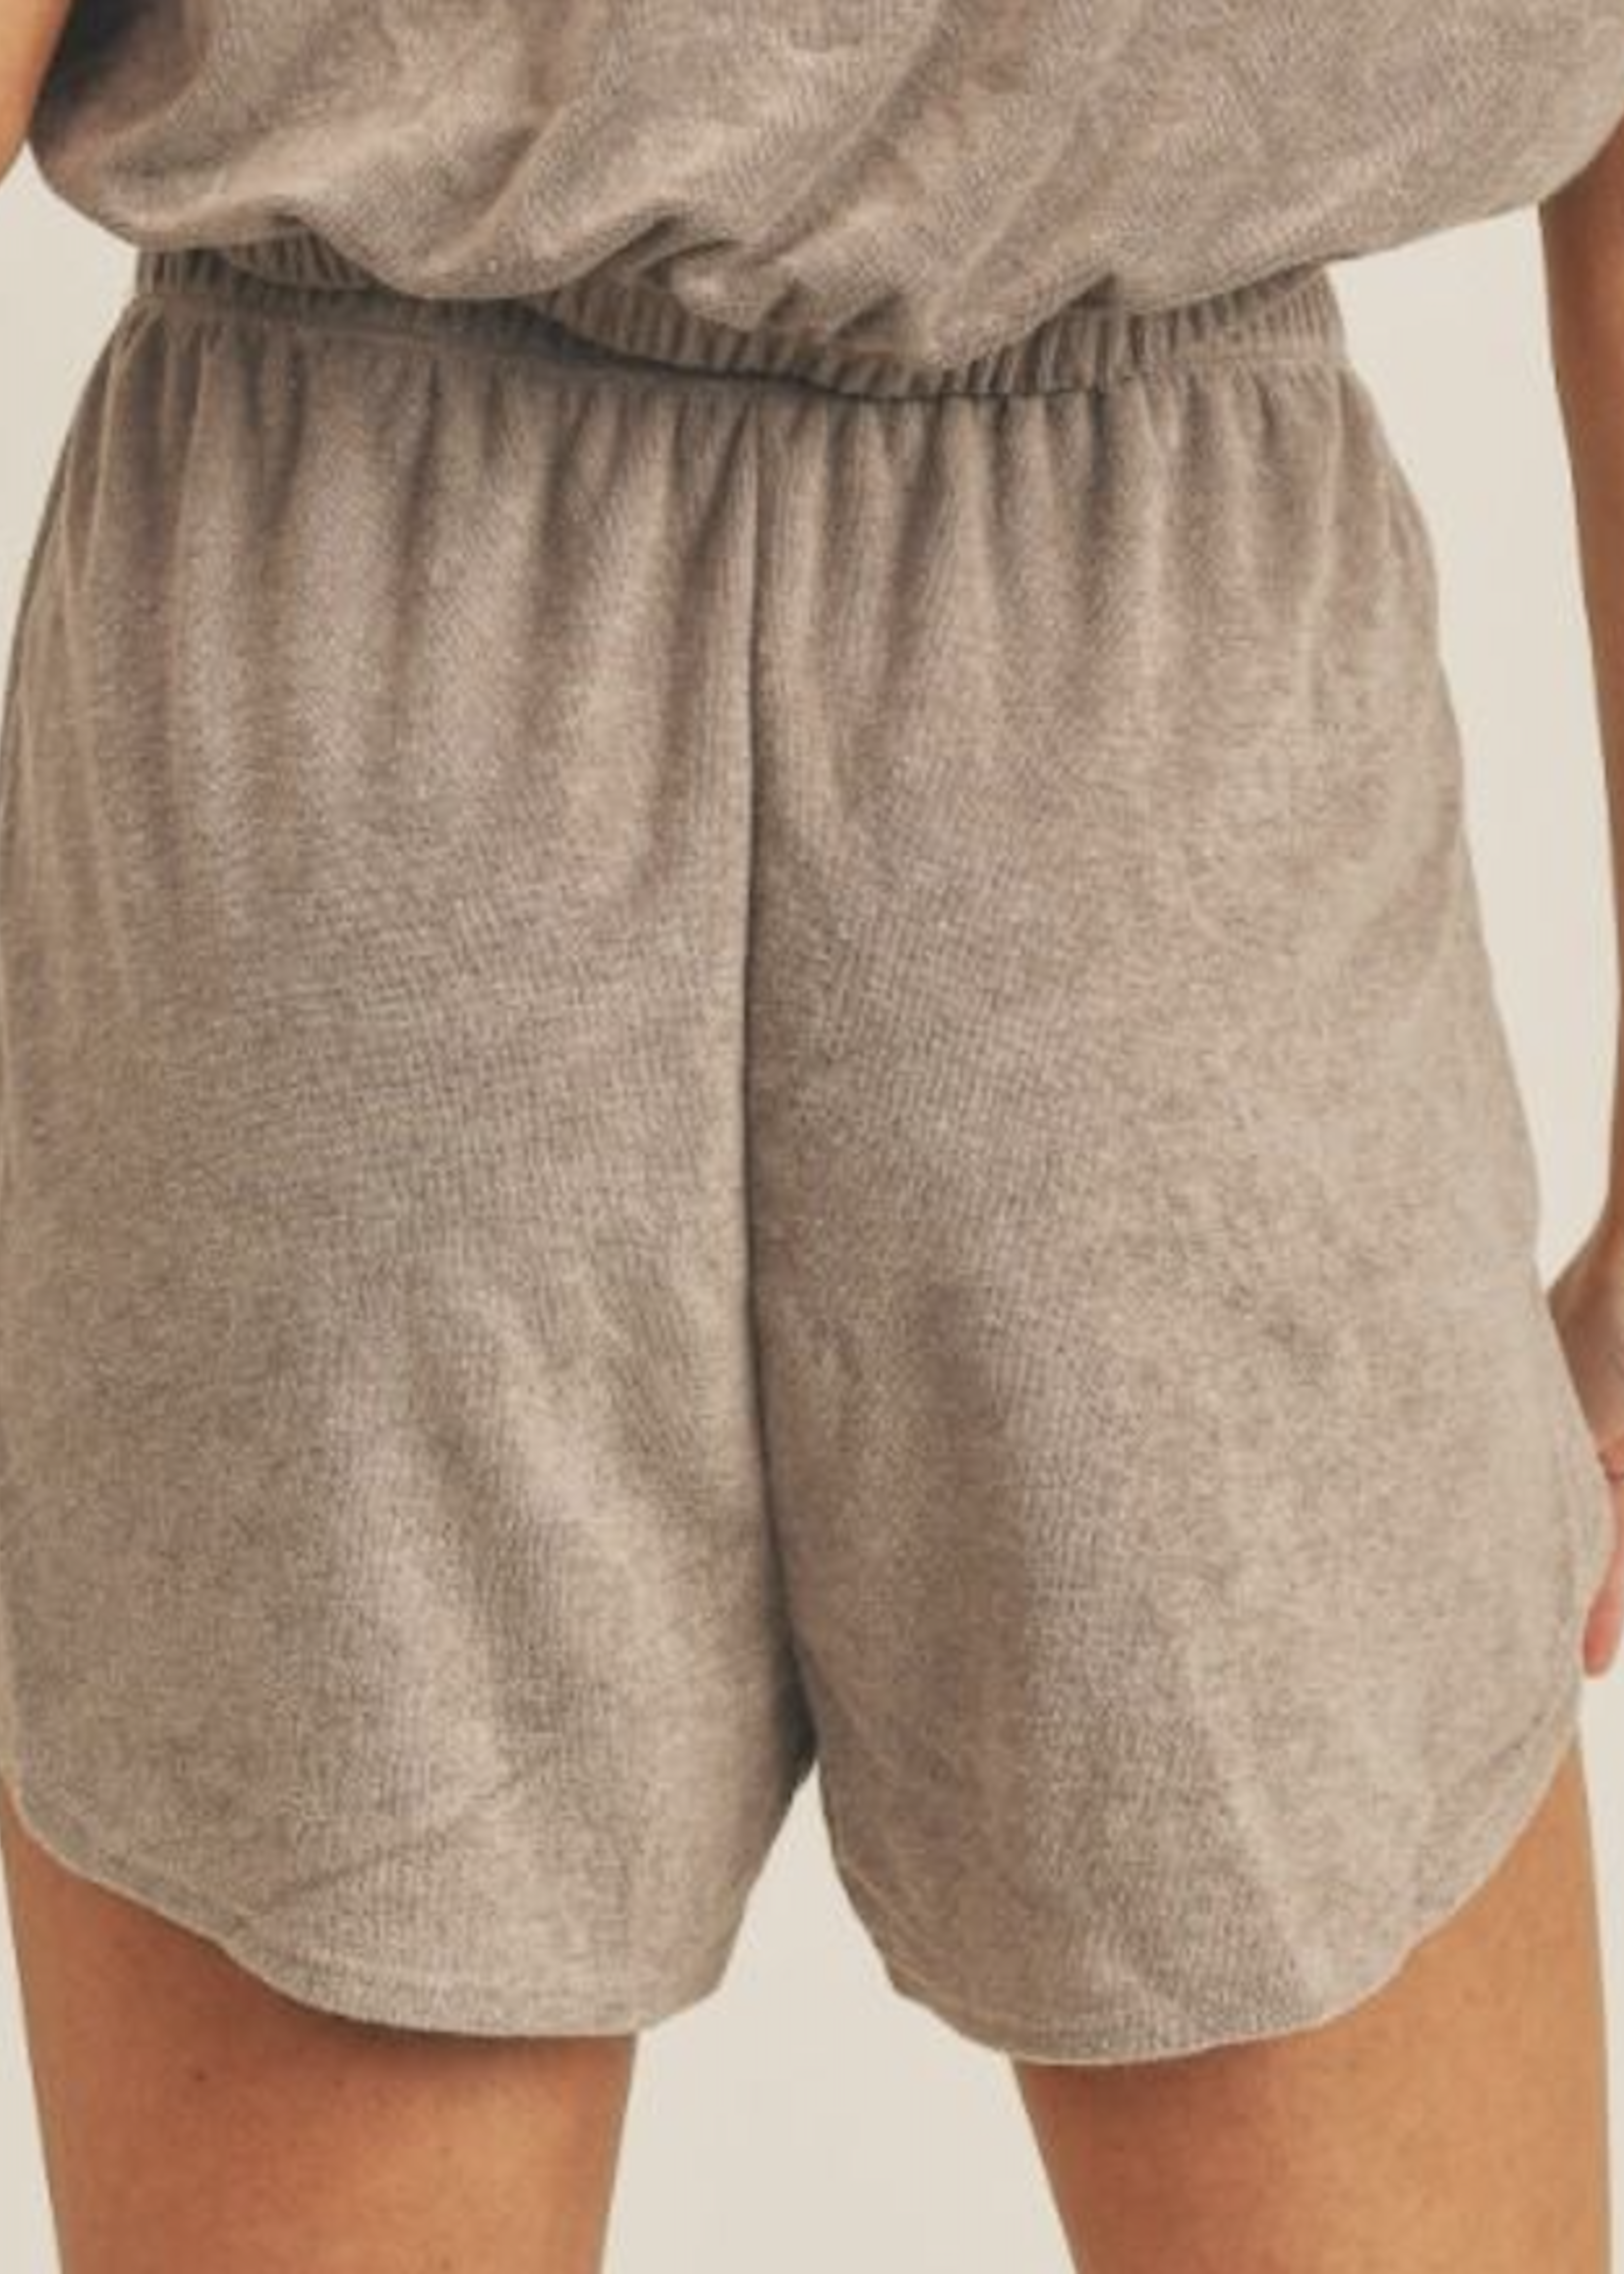 mable mable krissy shorts